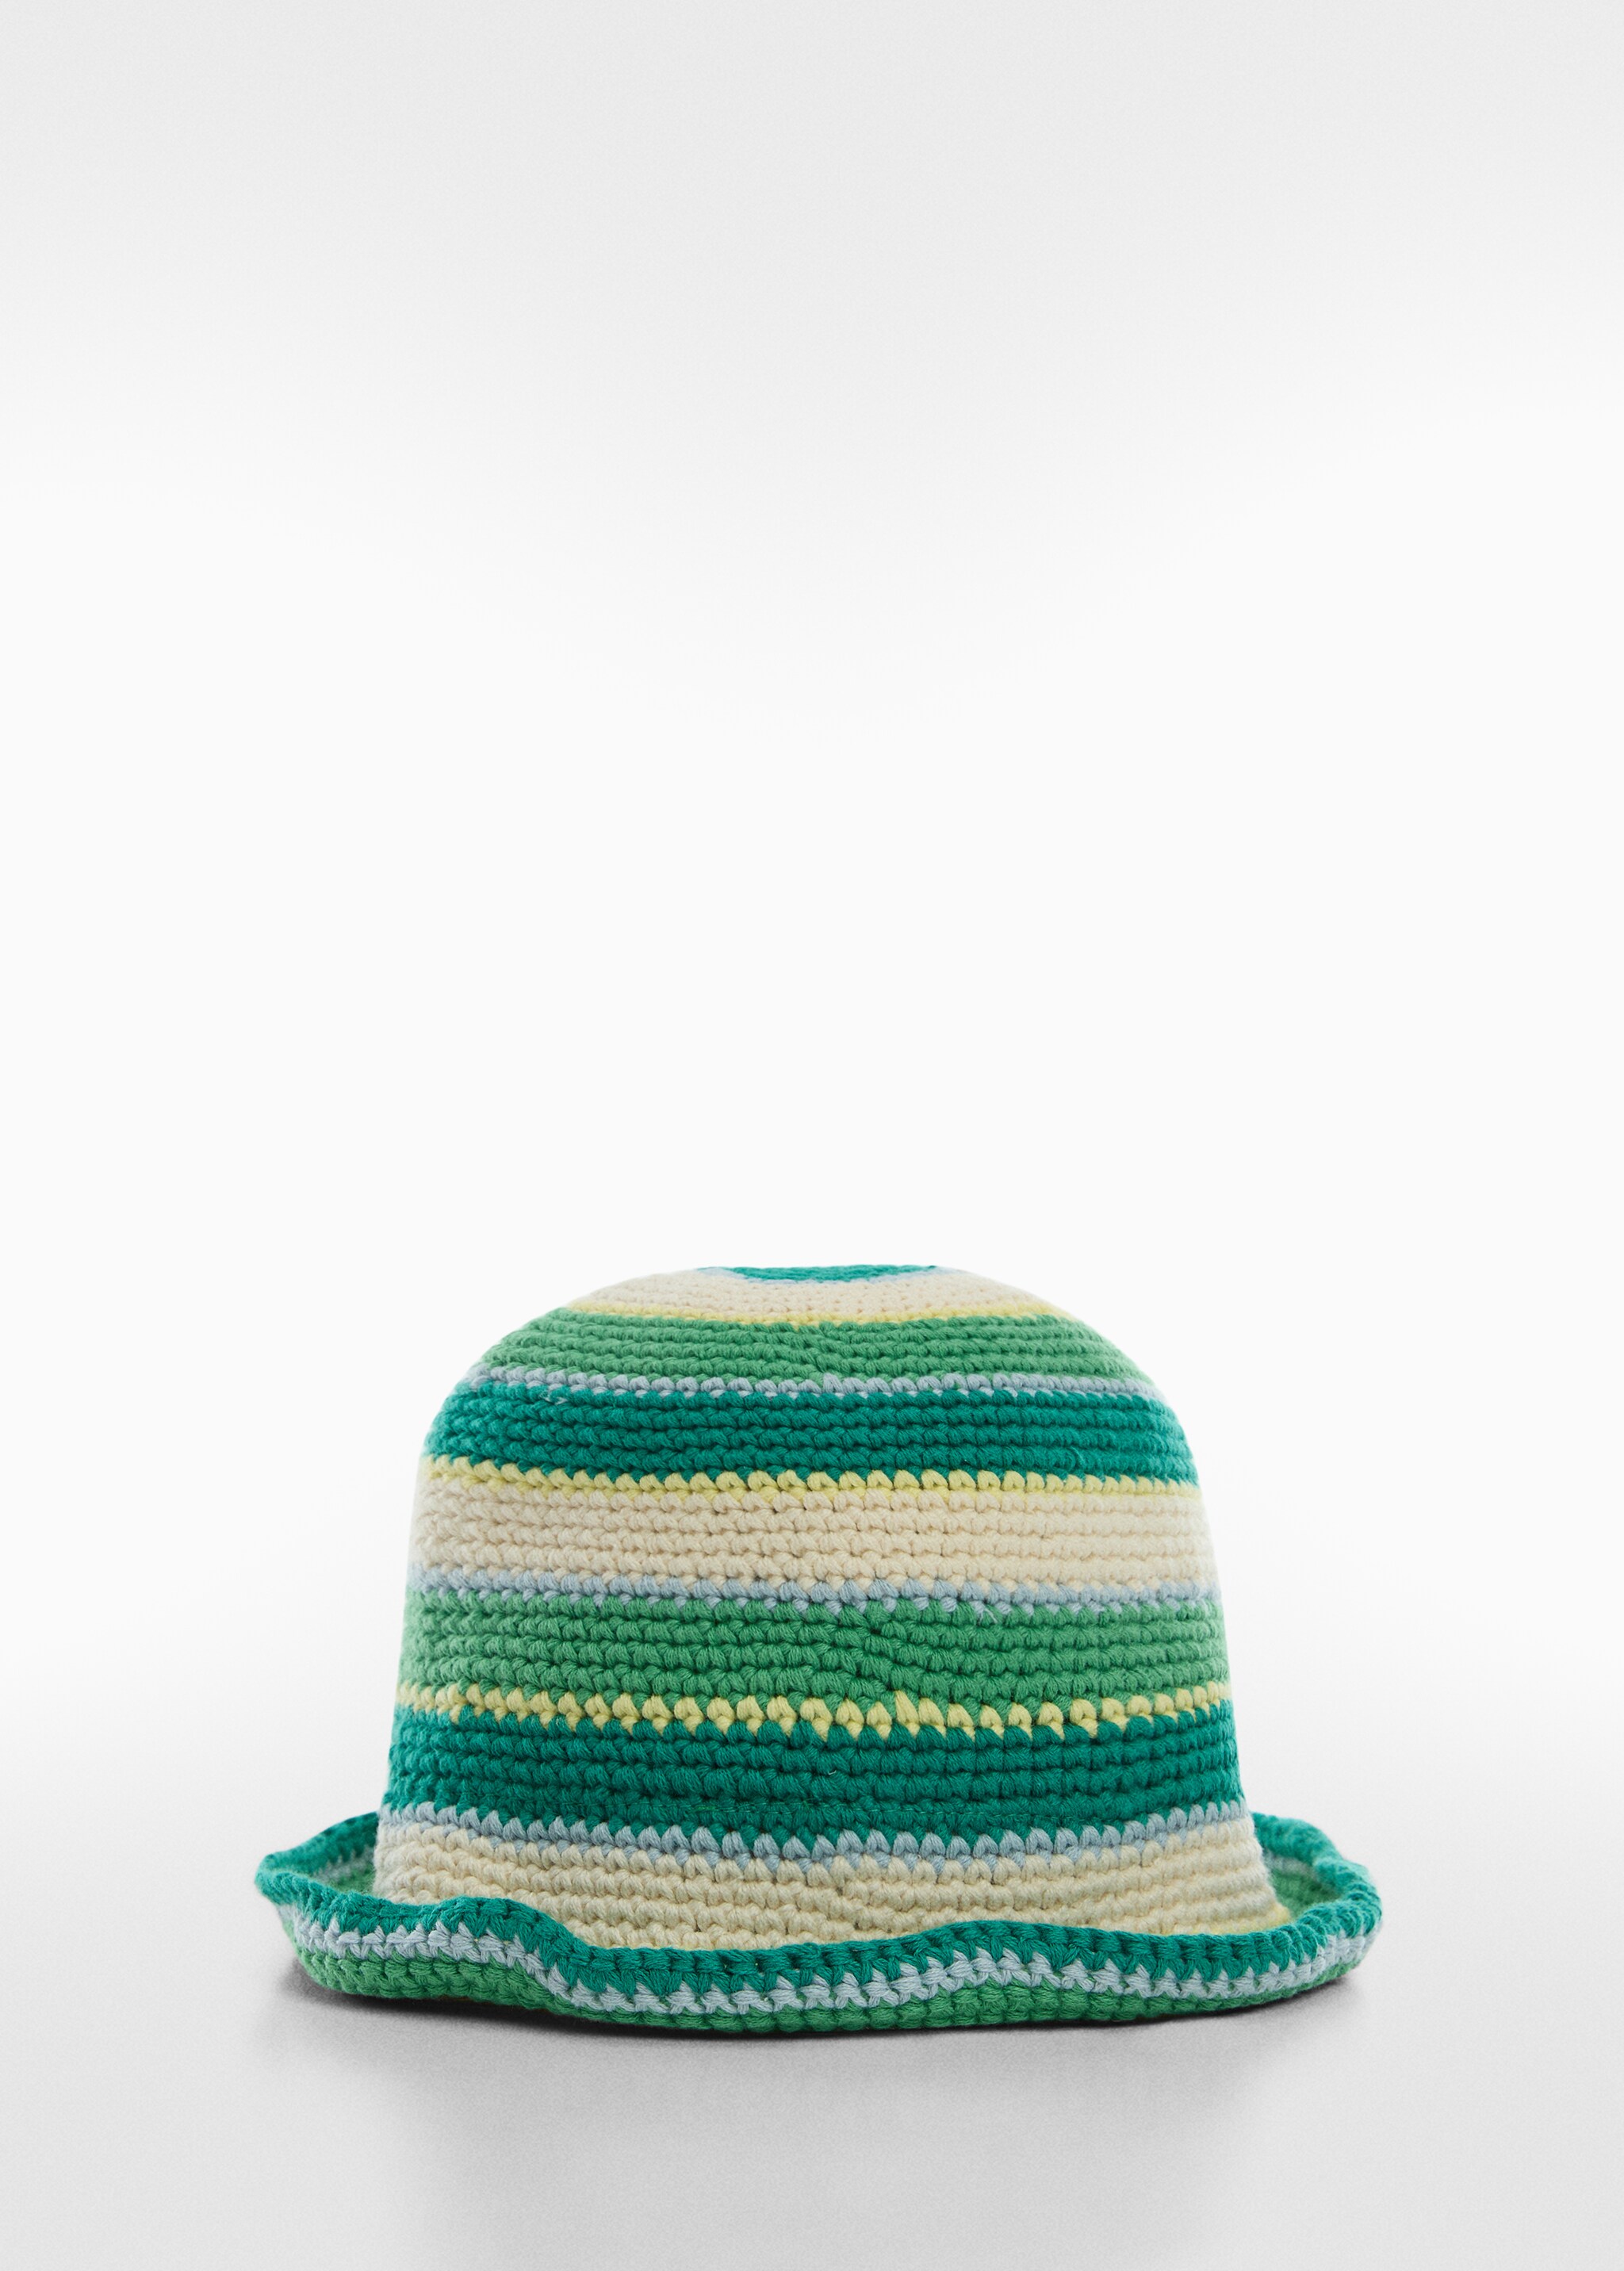 Crochet bucket hat - Article without model